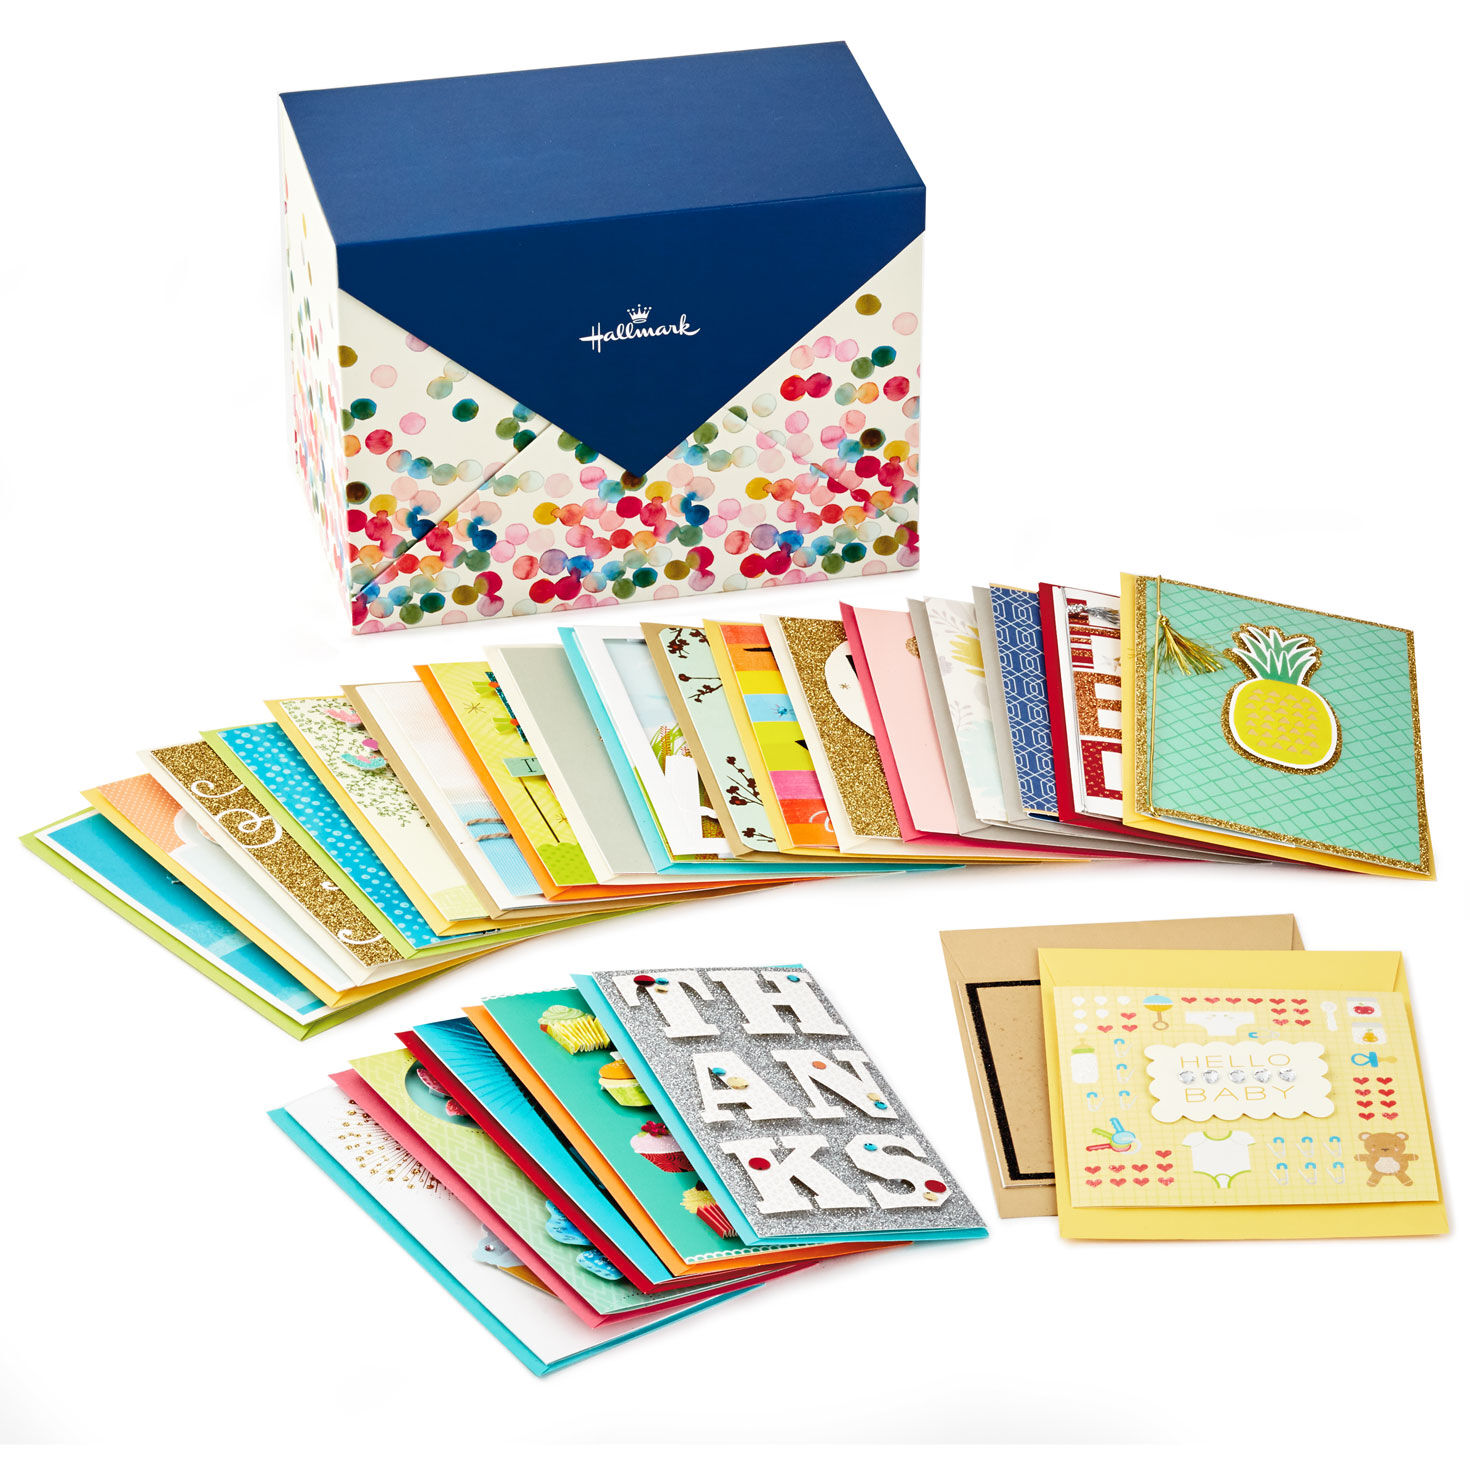 Assorted All-Occasion Cards in Polka Dot Organizer Box, Box of 24 for only USD 29.99 | Hallmark